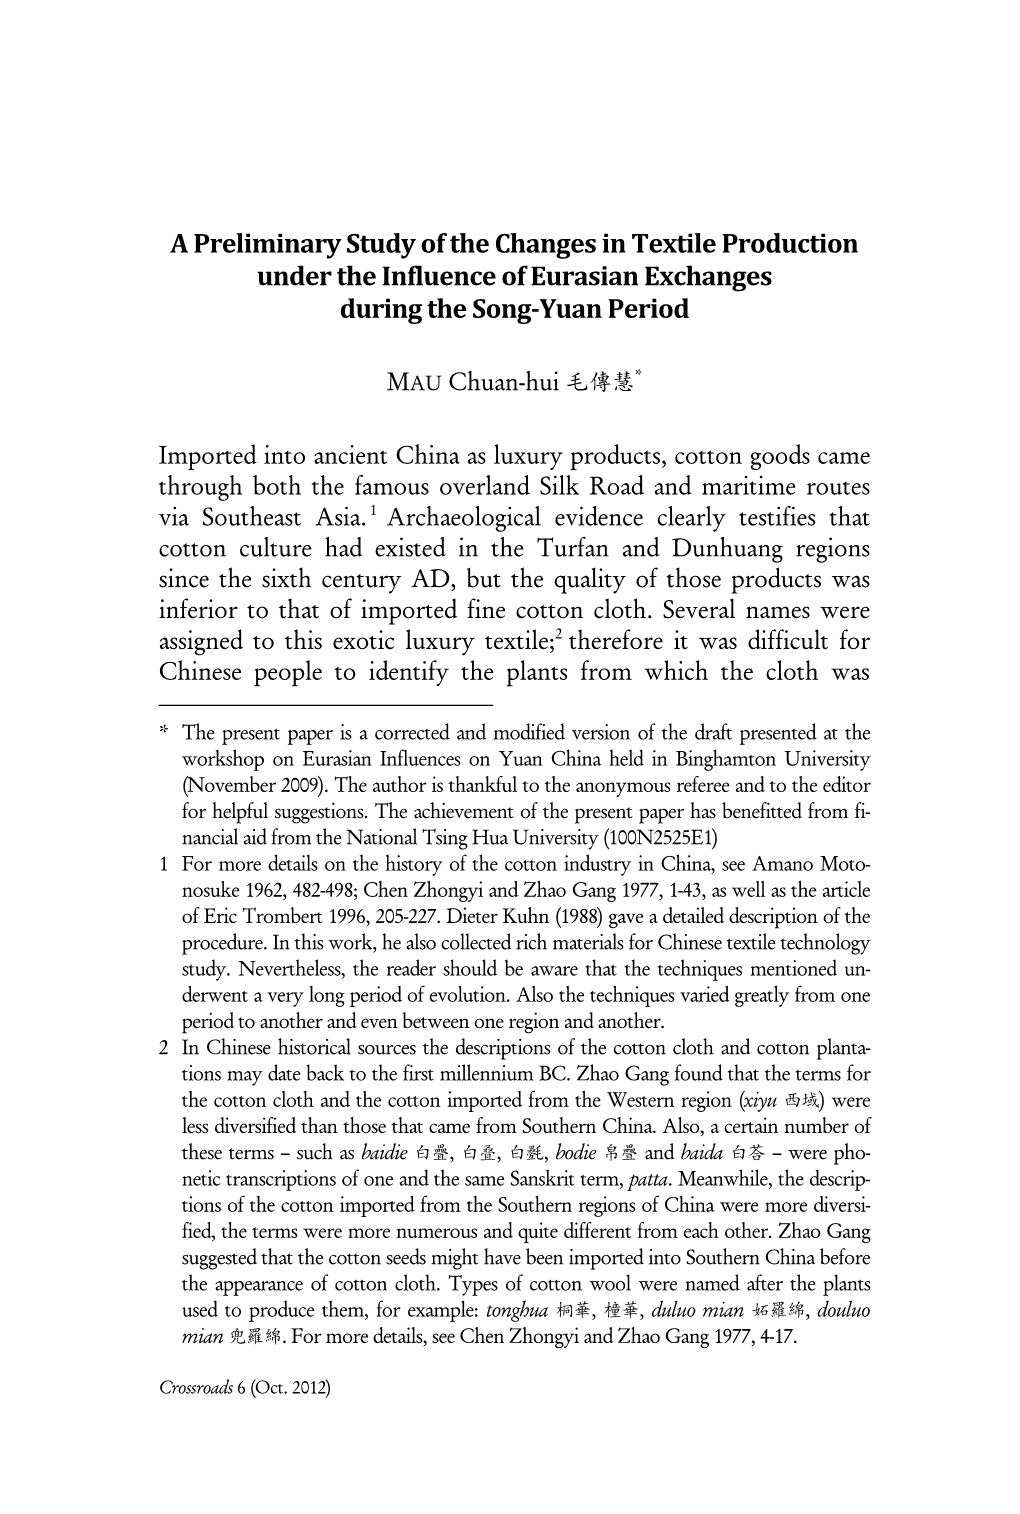 A Preliminary Study of the Changes in Textile Production Under the Influence of Eurasian Exchanges During the Song-Yuan Period